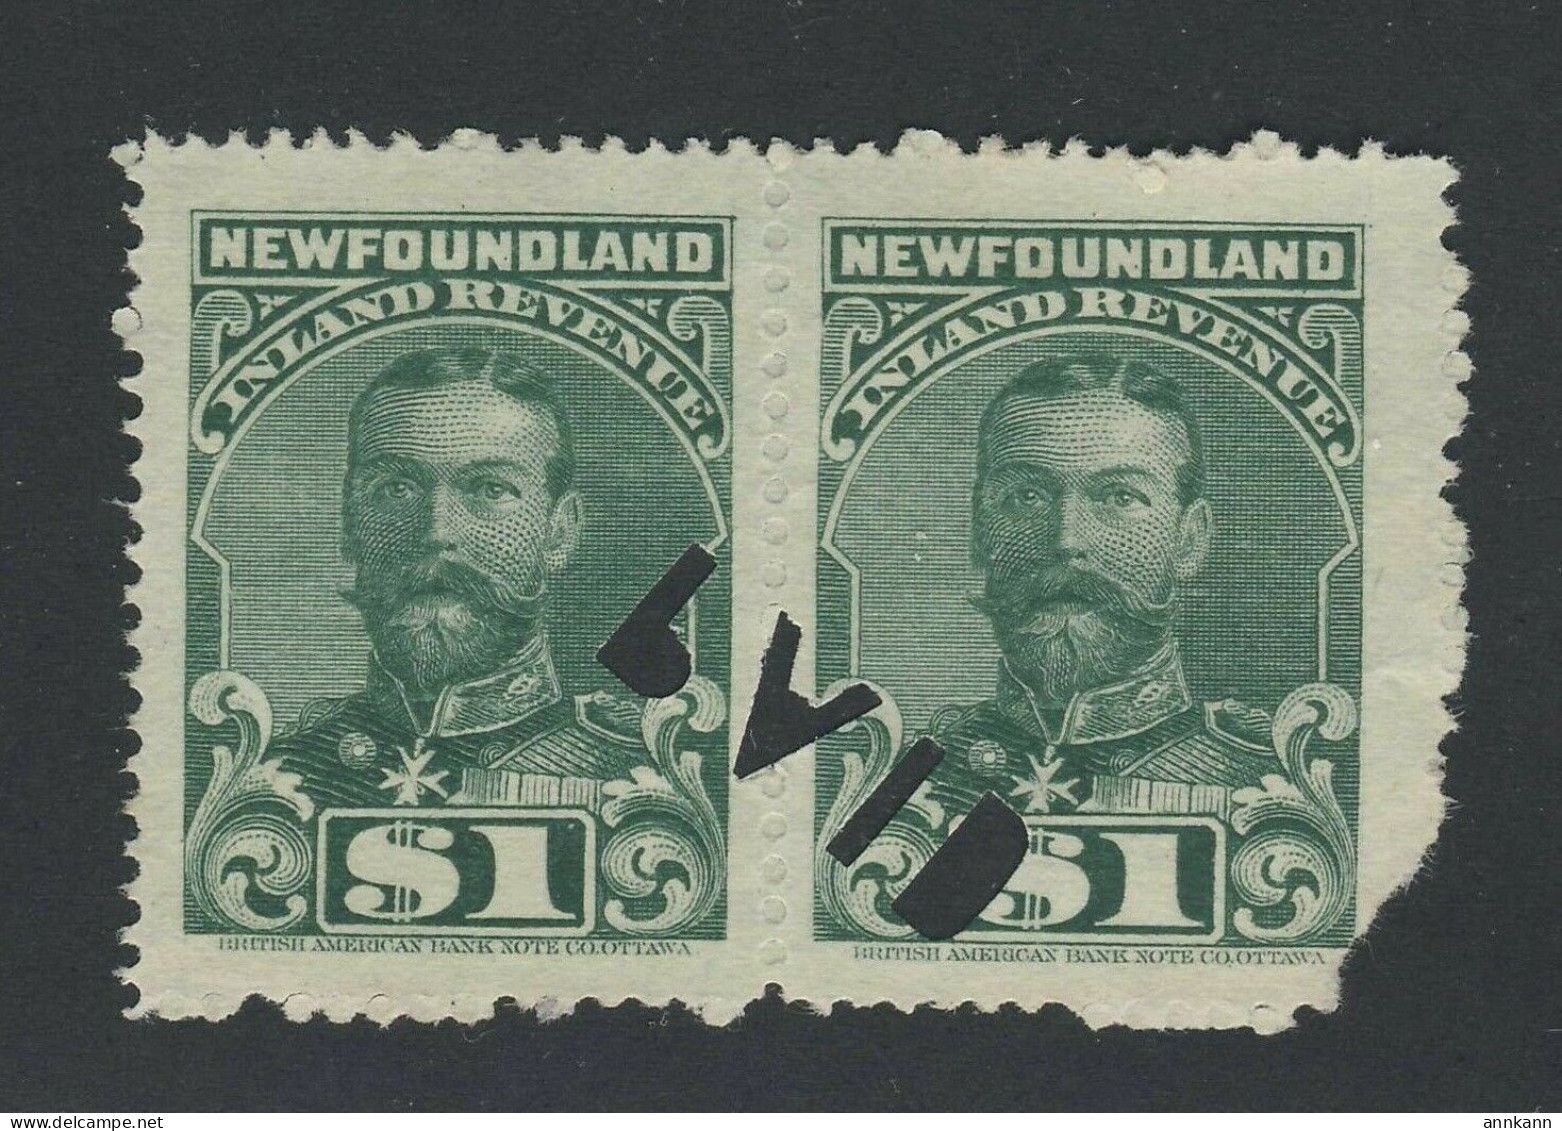 2x Newfoundland Used Inland Revenue Stamps 1910 George V Pair NFR 20-$1.00 - Fiscali